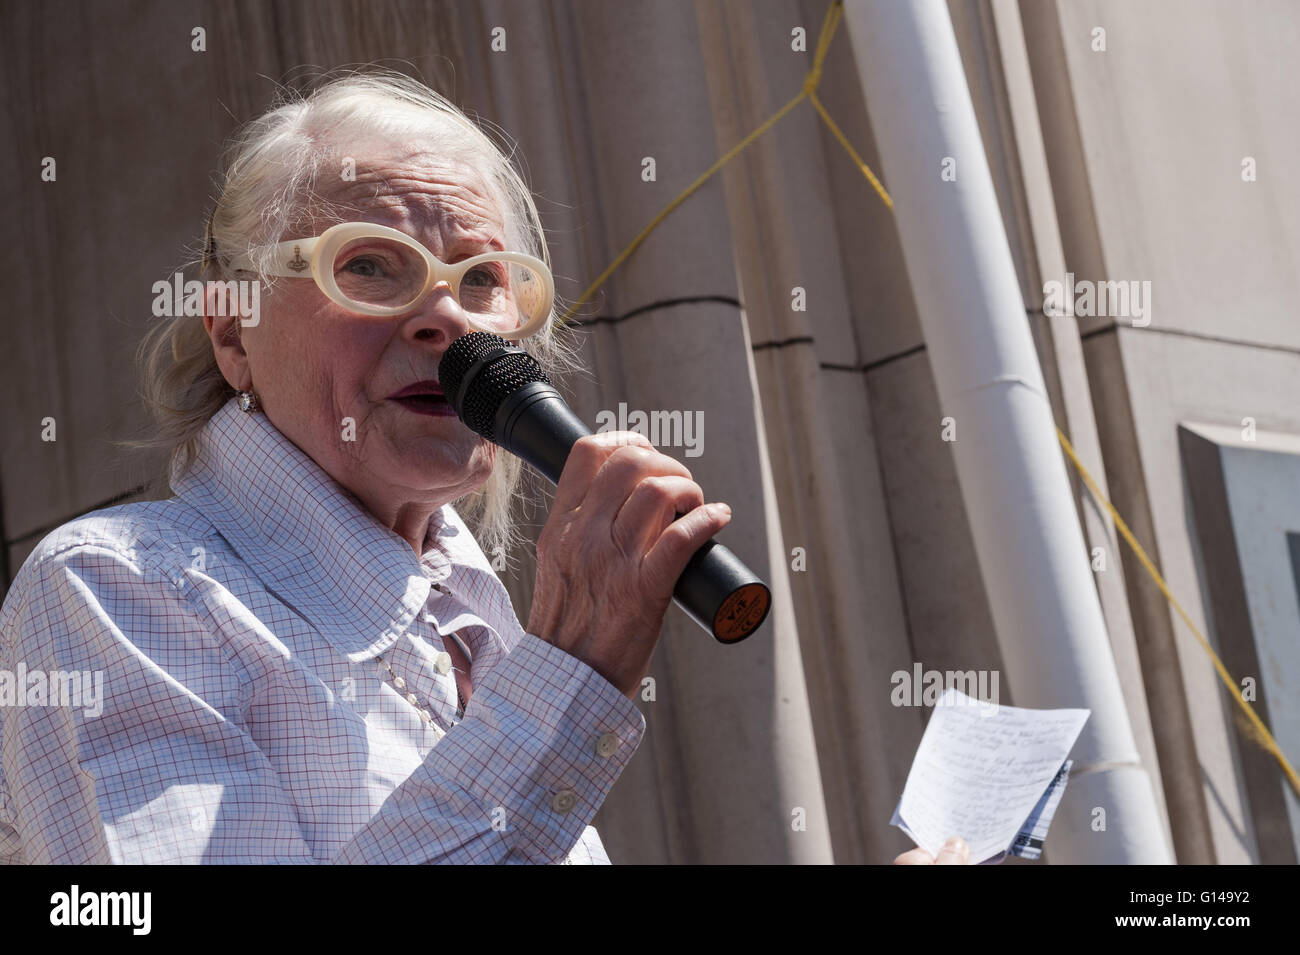 London, UK. 08th May 2016. Dame Vivienne Westwood makes a speech during 'Going Backwards on Climate Change' protest by the Department of Energy & Climate Change. Wiktor Szymanowicz/Alamy Live News Stock Photo